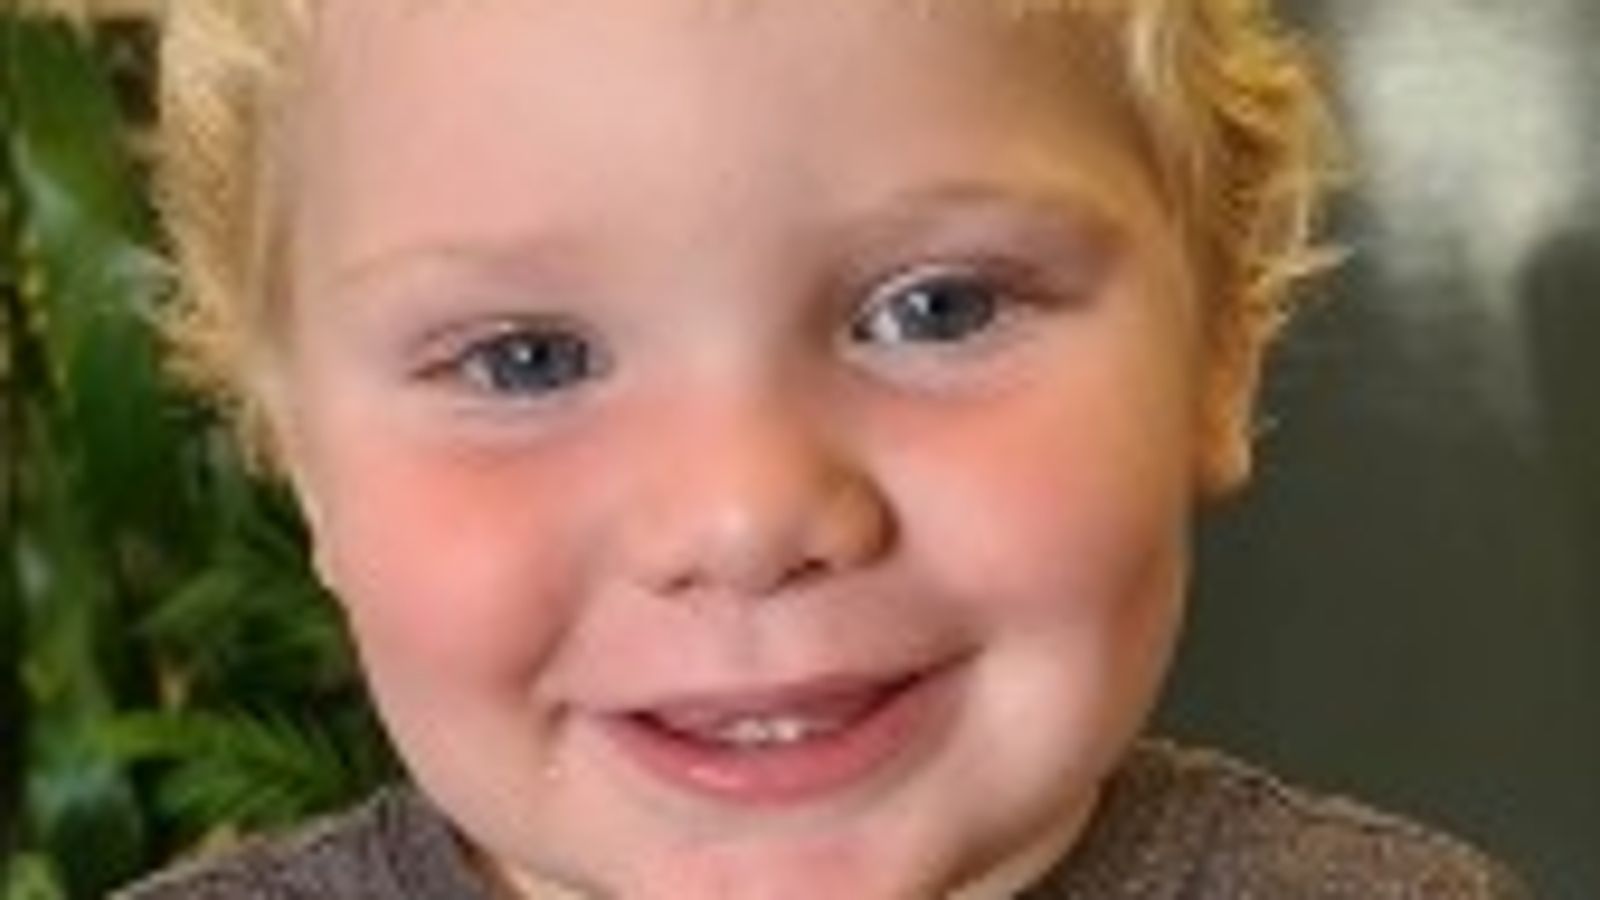 Jax Wilson: Toddler who was snatched in street in Australia found 180 miles away